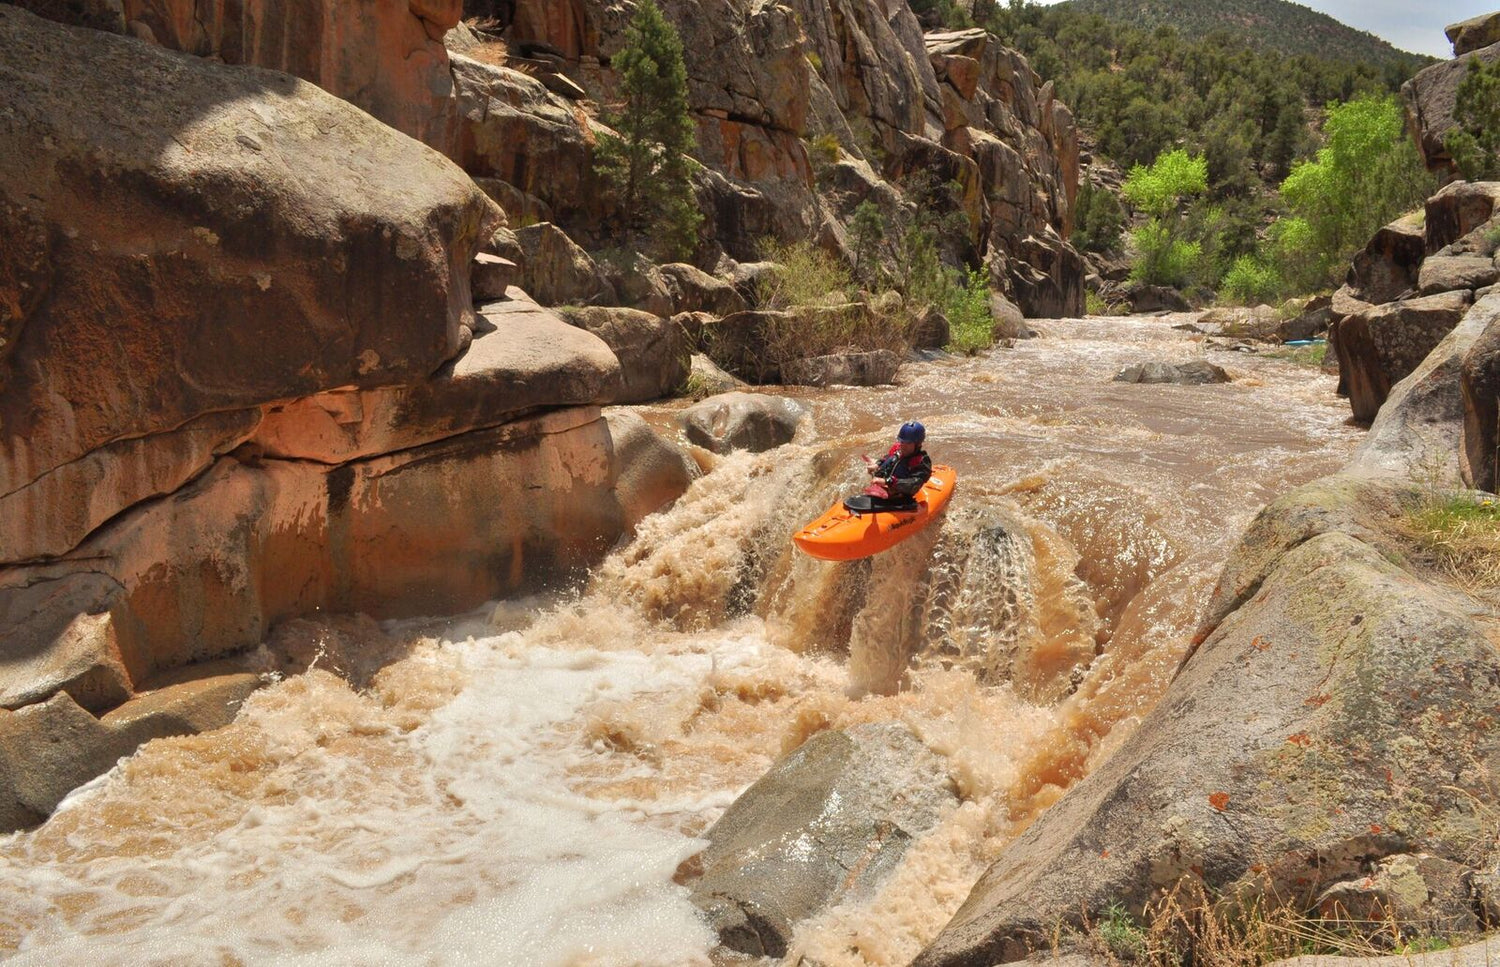 a man riding a kayak down a river surrounded by rocks.